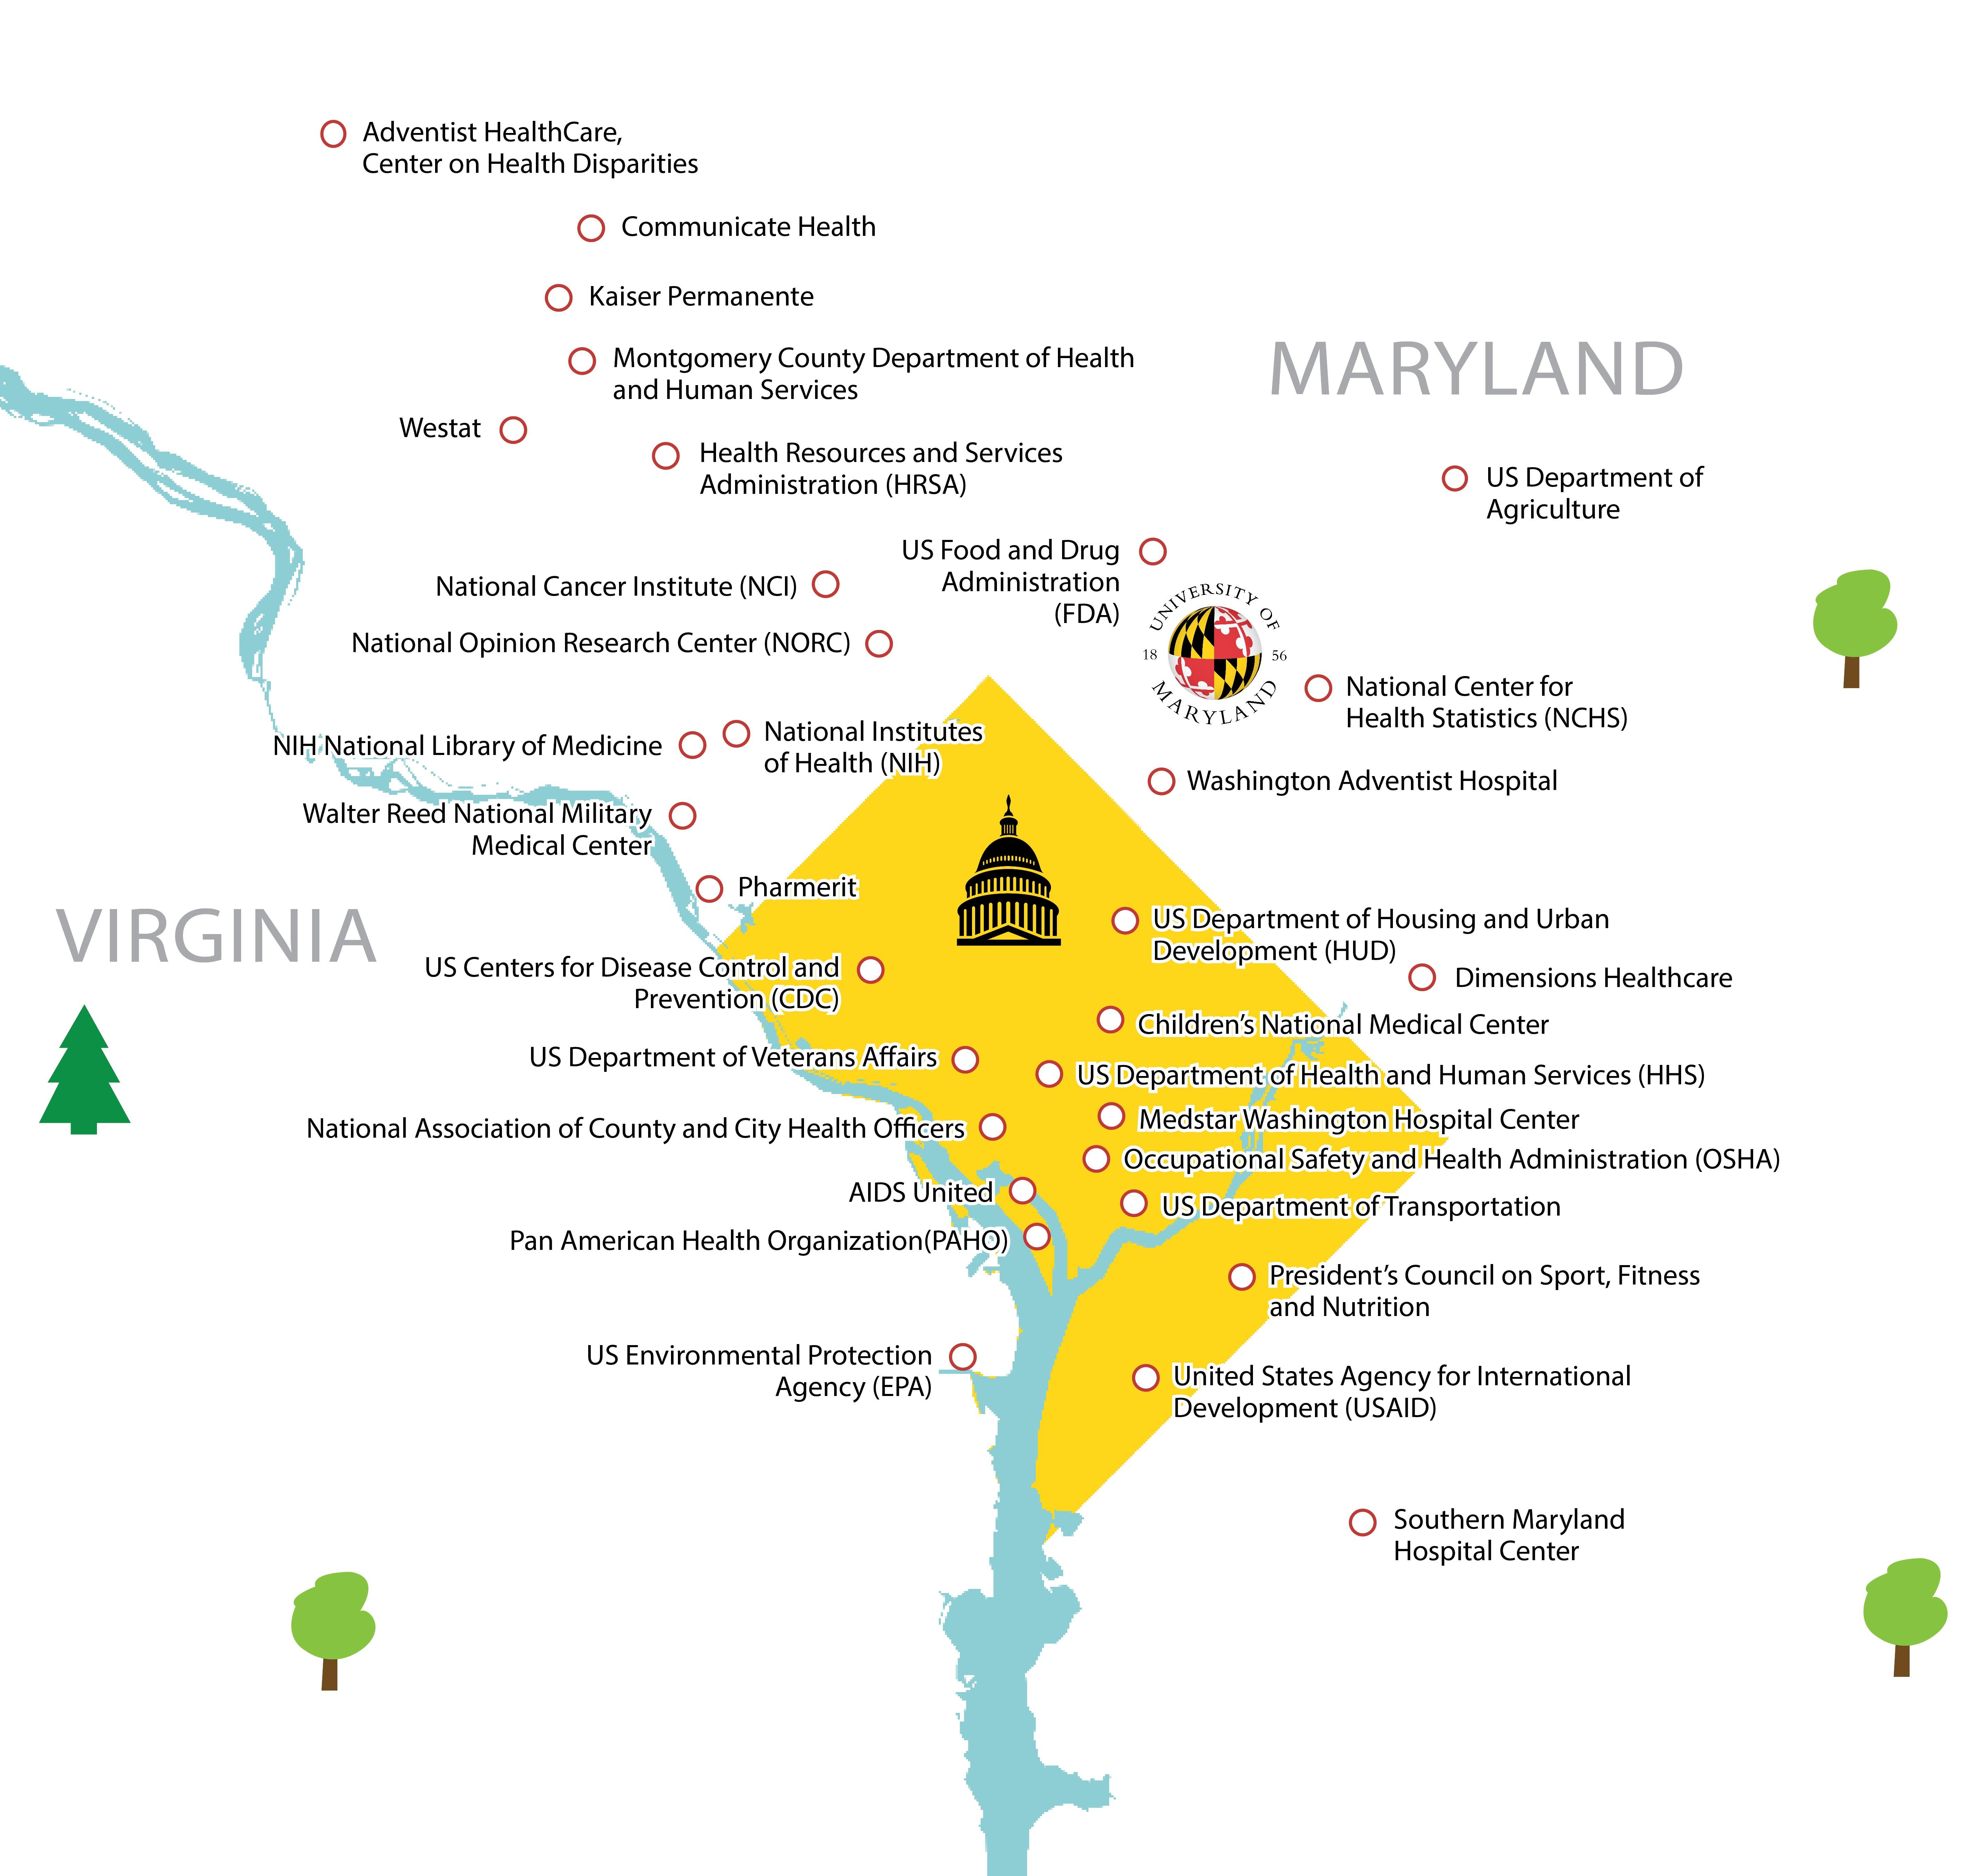 DC-Maryland-Virginia map illustration showing location of University of Maryland and its proximity to many major health institutions.